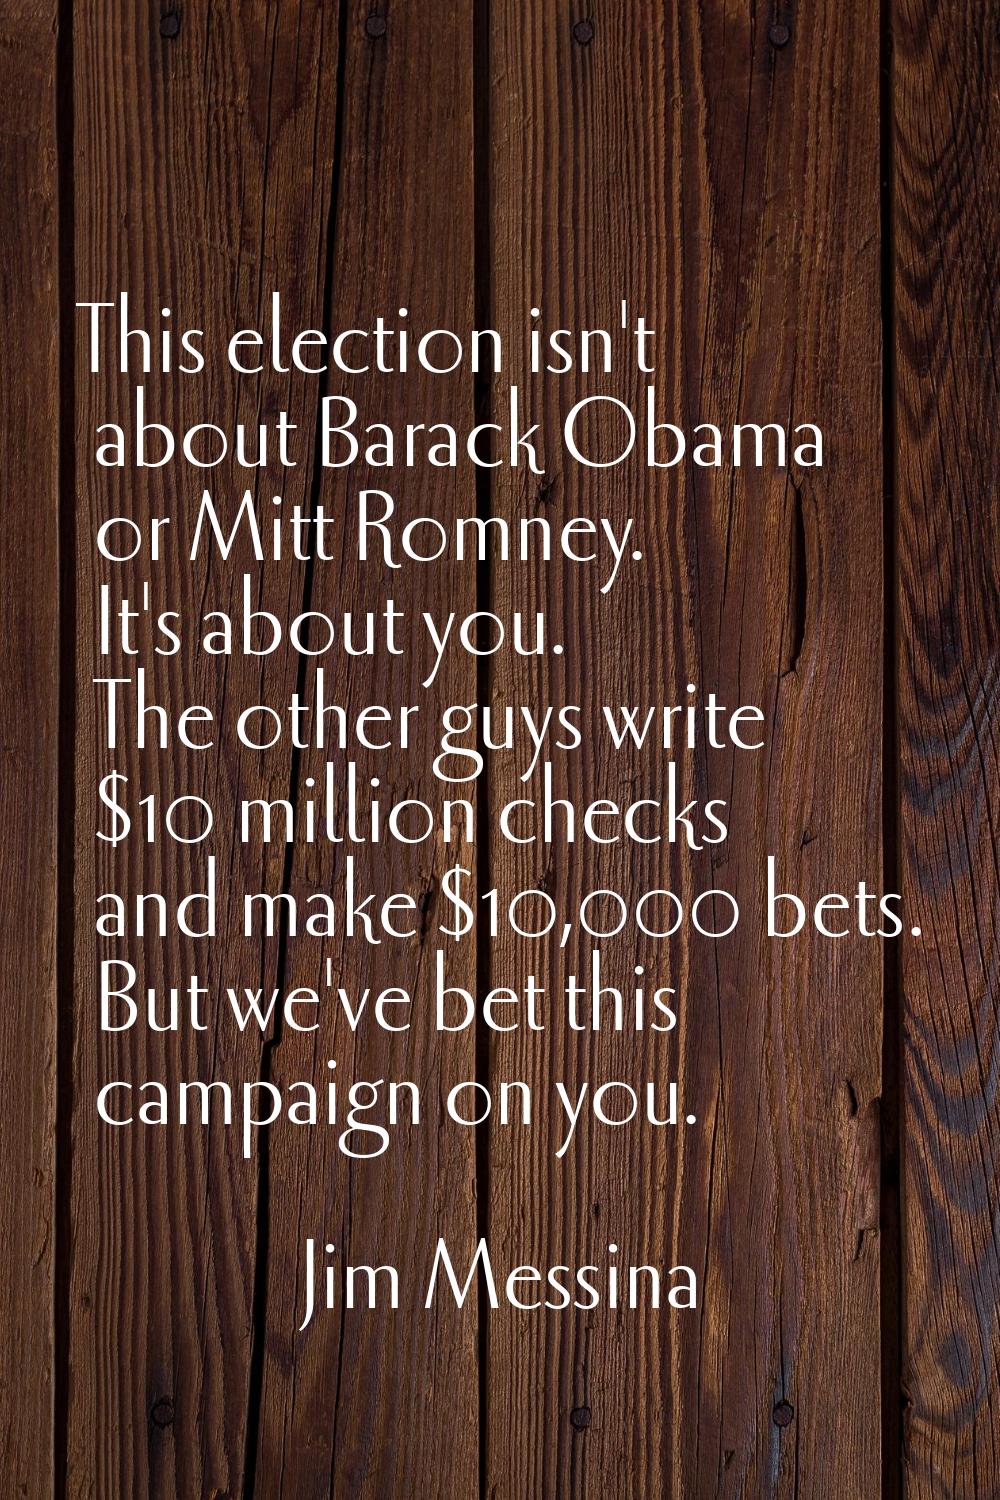 This election isn't about Barack Obama or Mitt Romney. It's about you. The other guys write $10 mil